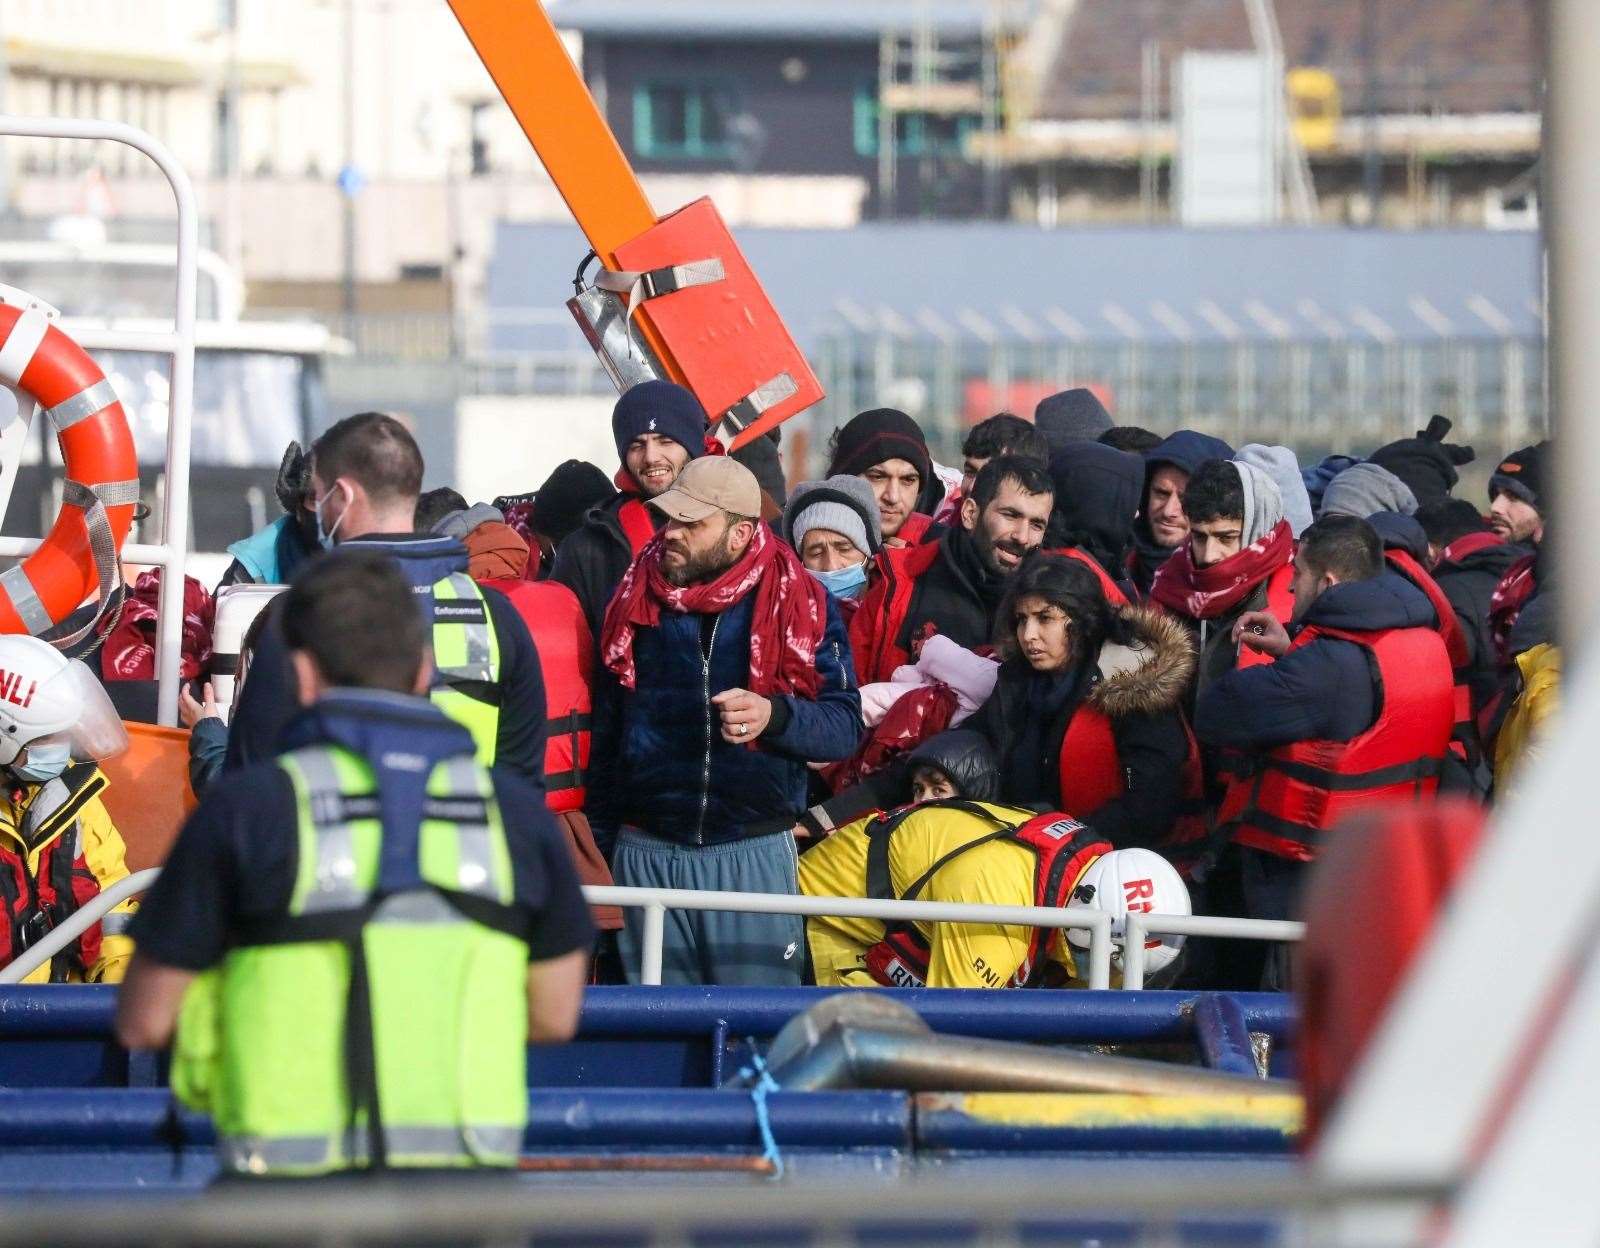 Asylum seekers at Tug Haven. Picture: UKNIP